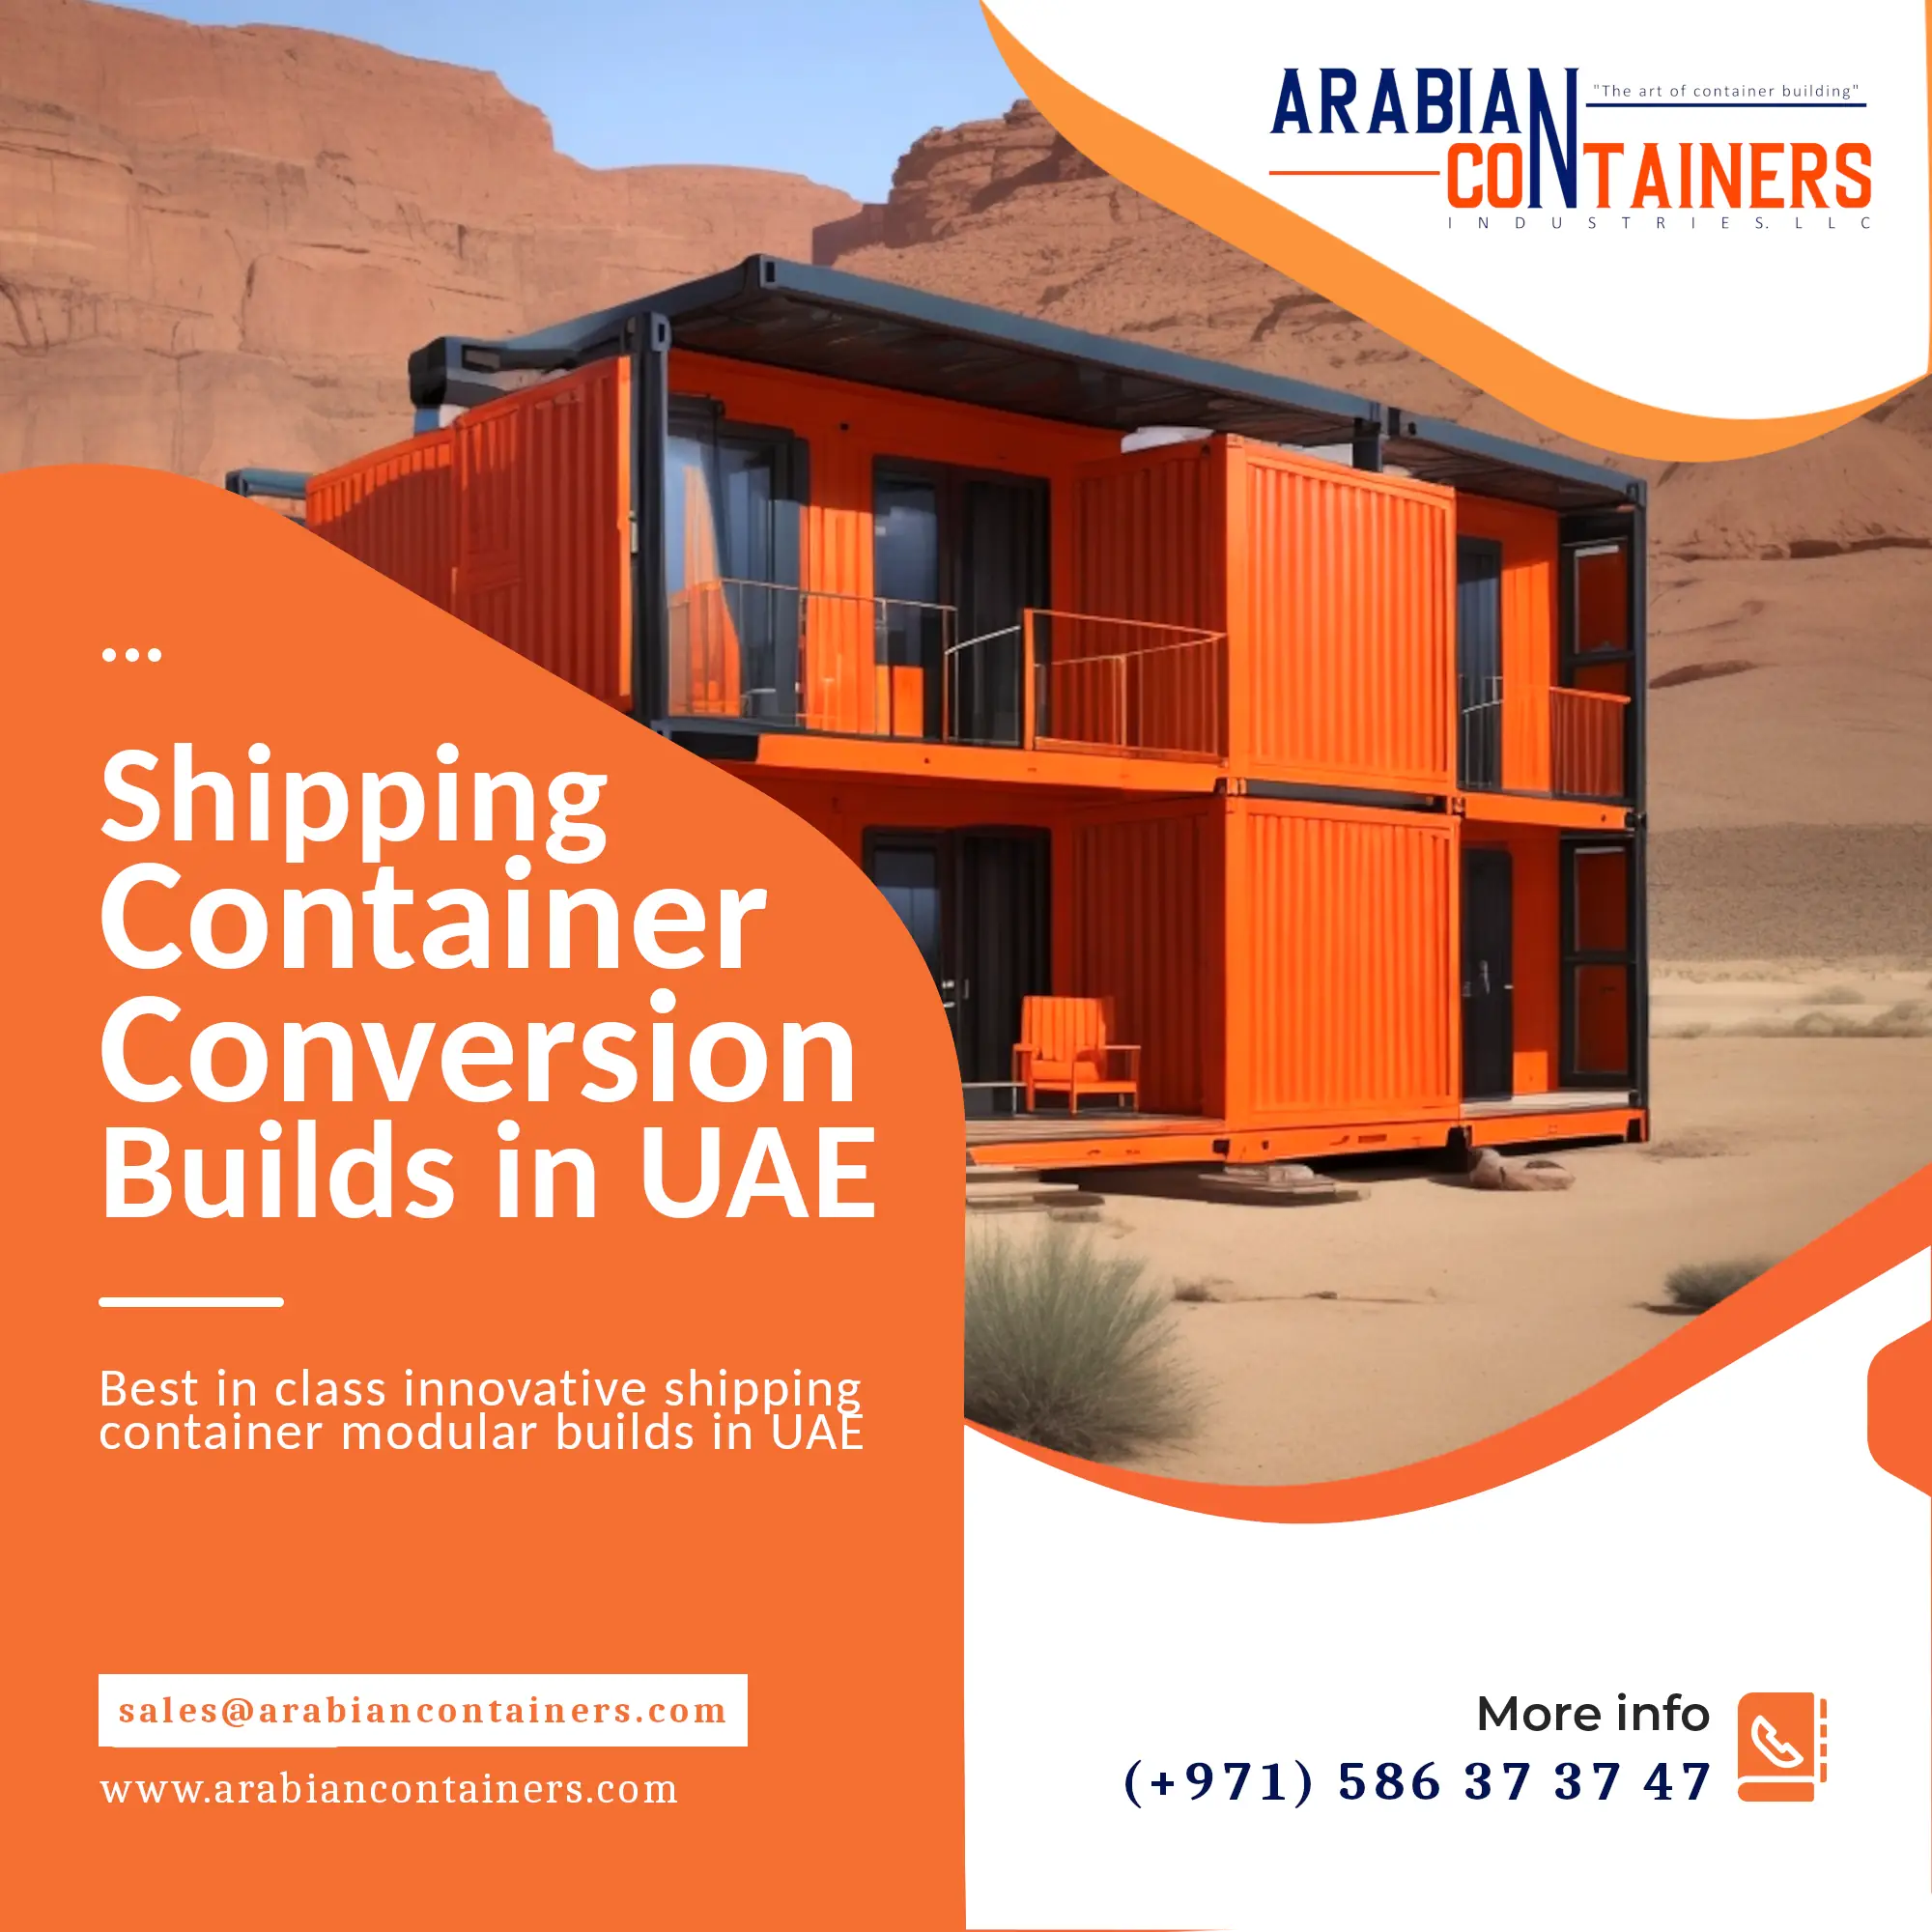 Shipping Container Conversions in the UAE